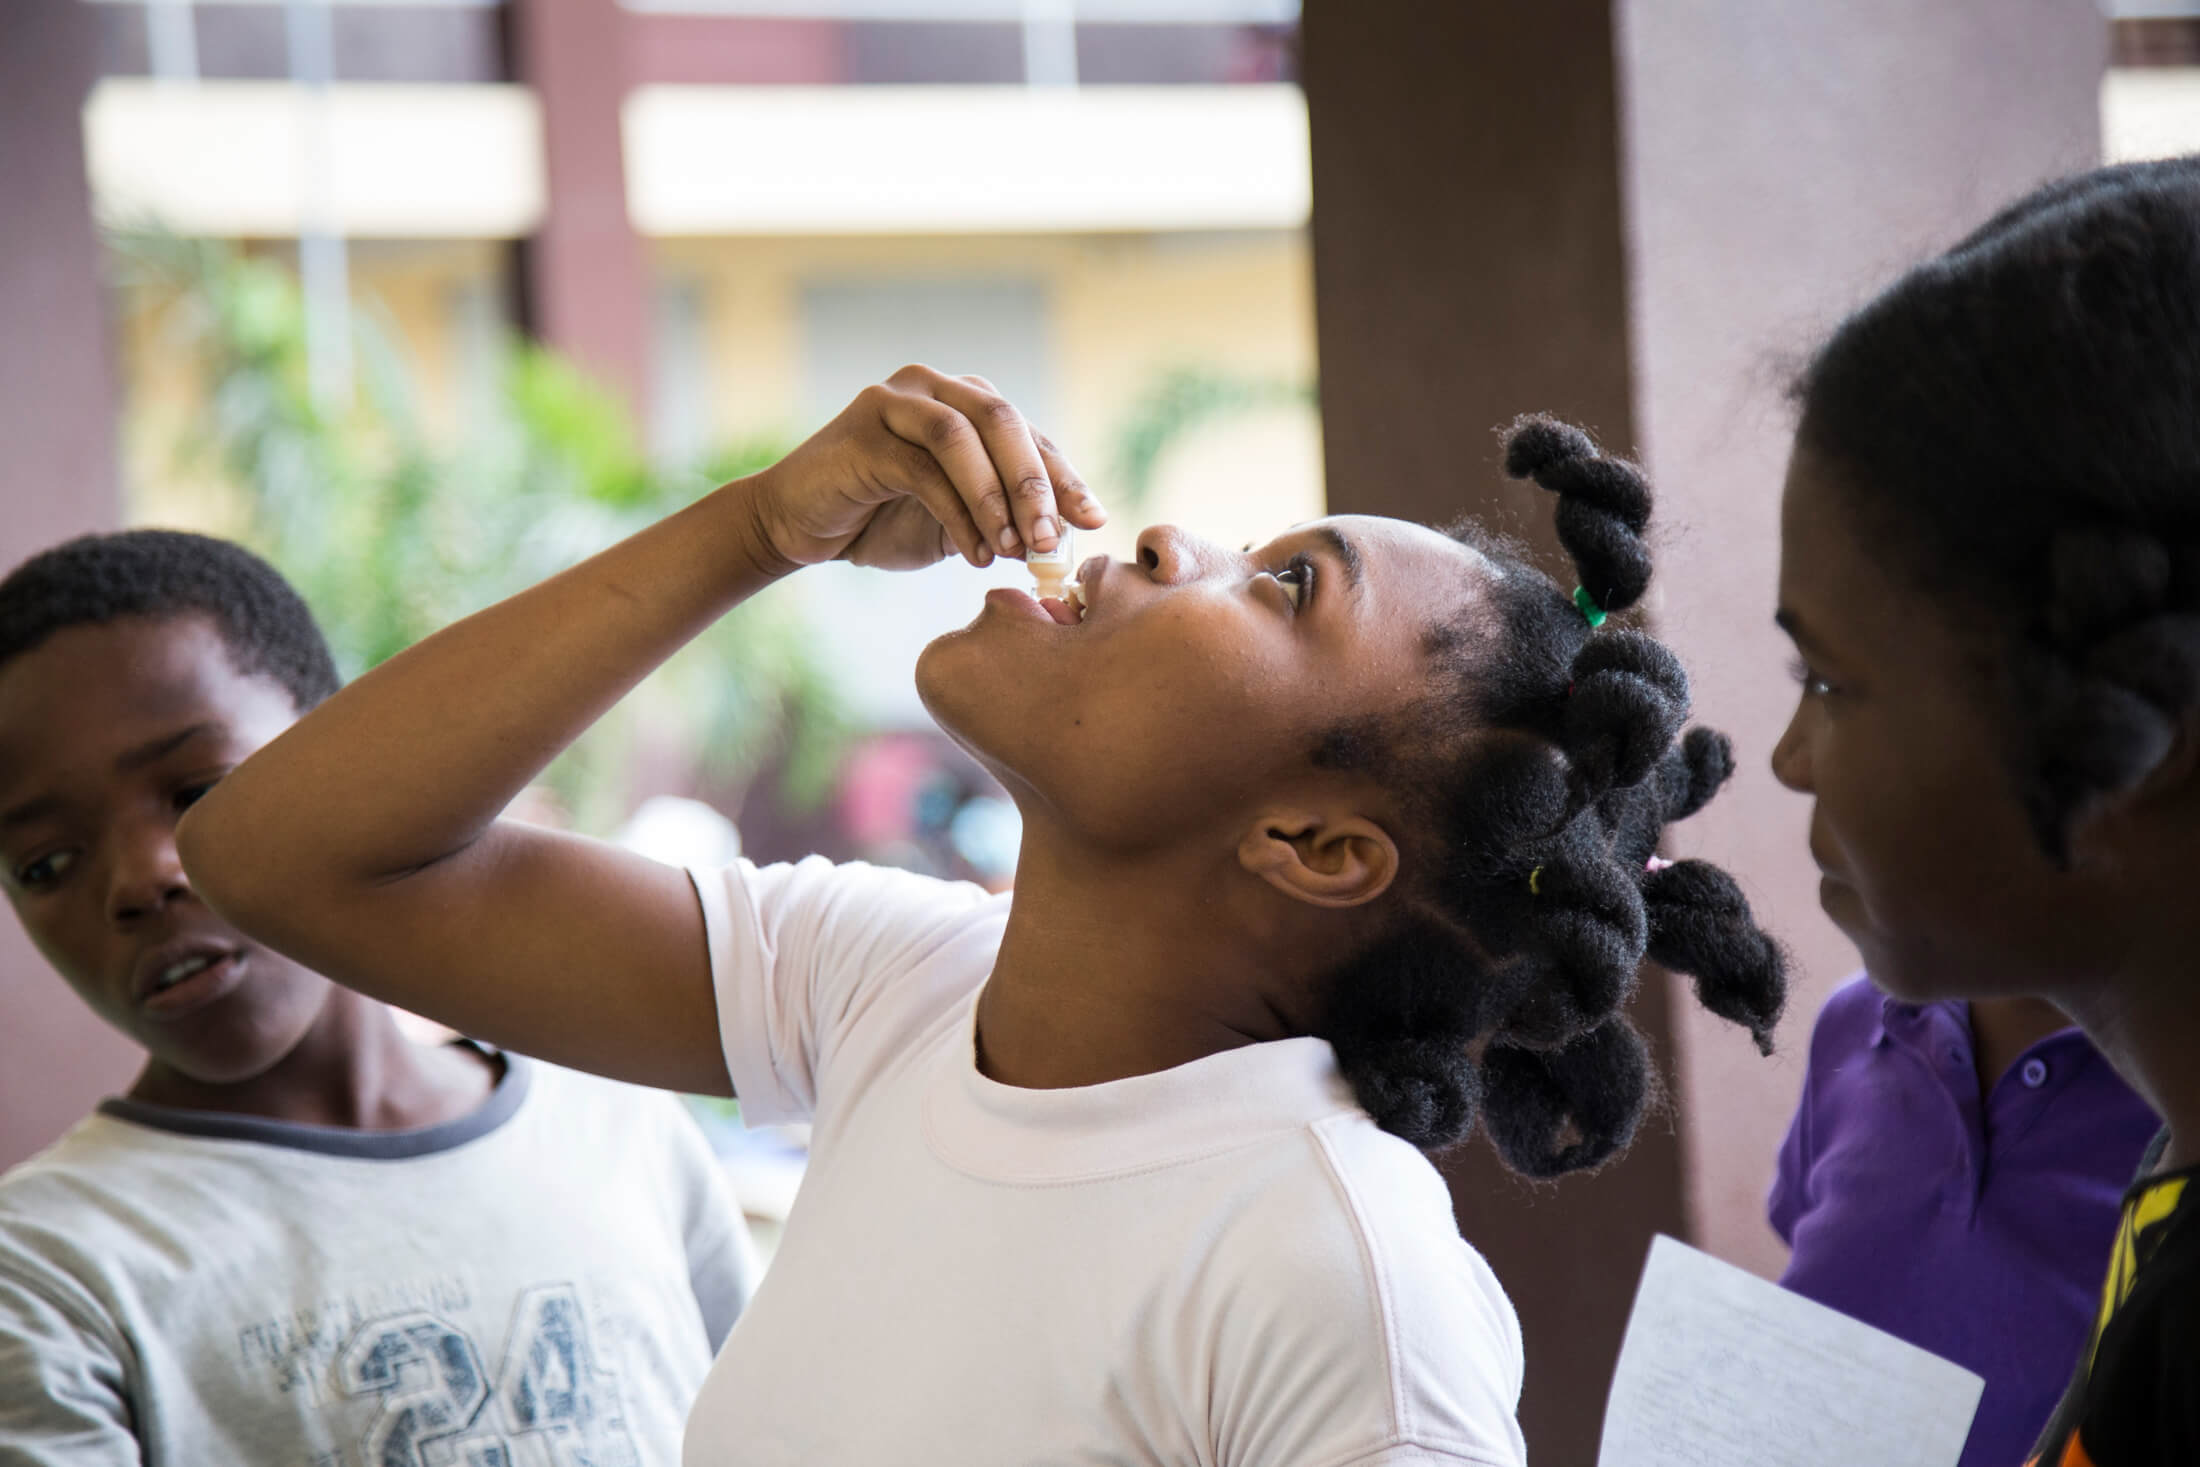 At a displacement site in Les Cayes, Haiti, a young girl takes the oral cholera vaccine during the campaign to vaccinate 800,000 people in Haiti after Hurricane Matthew.